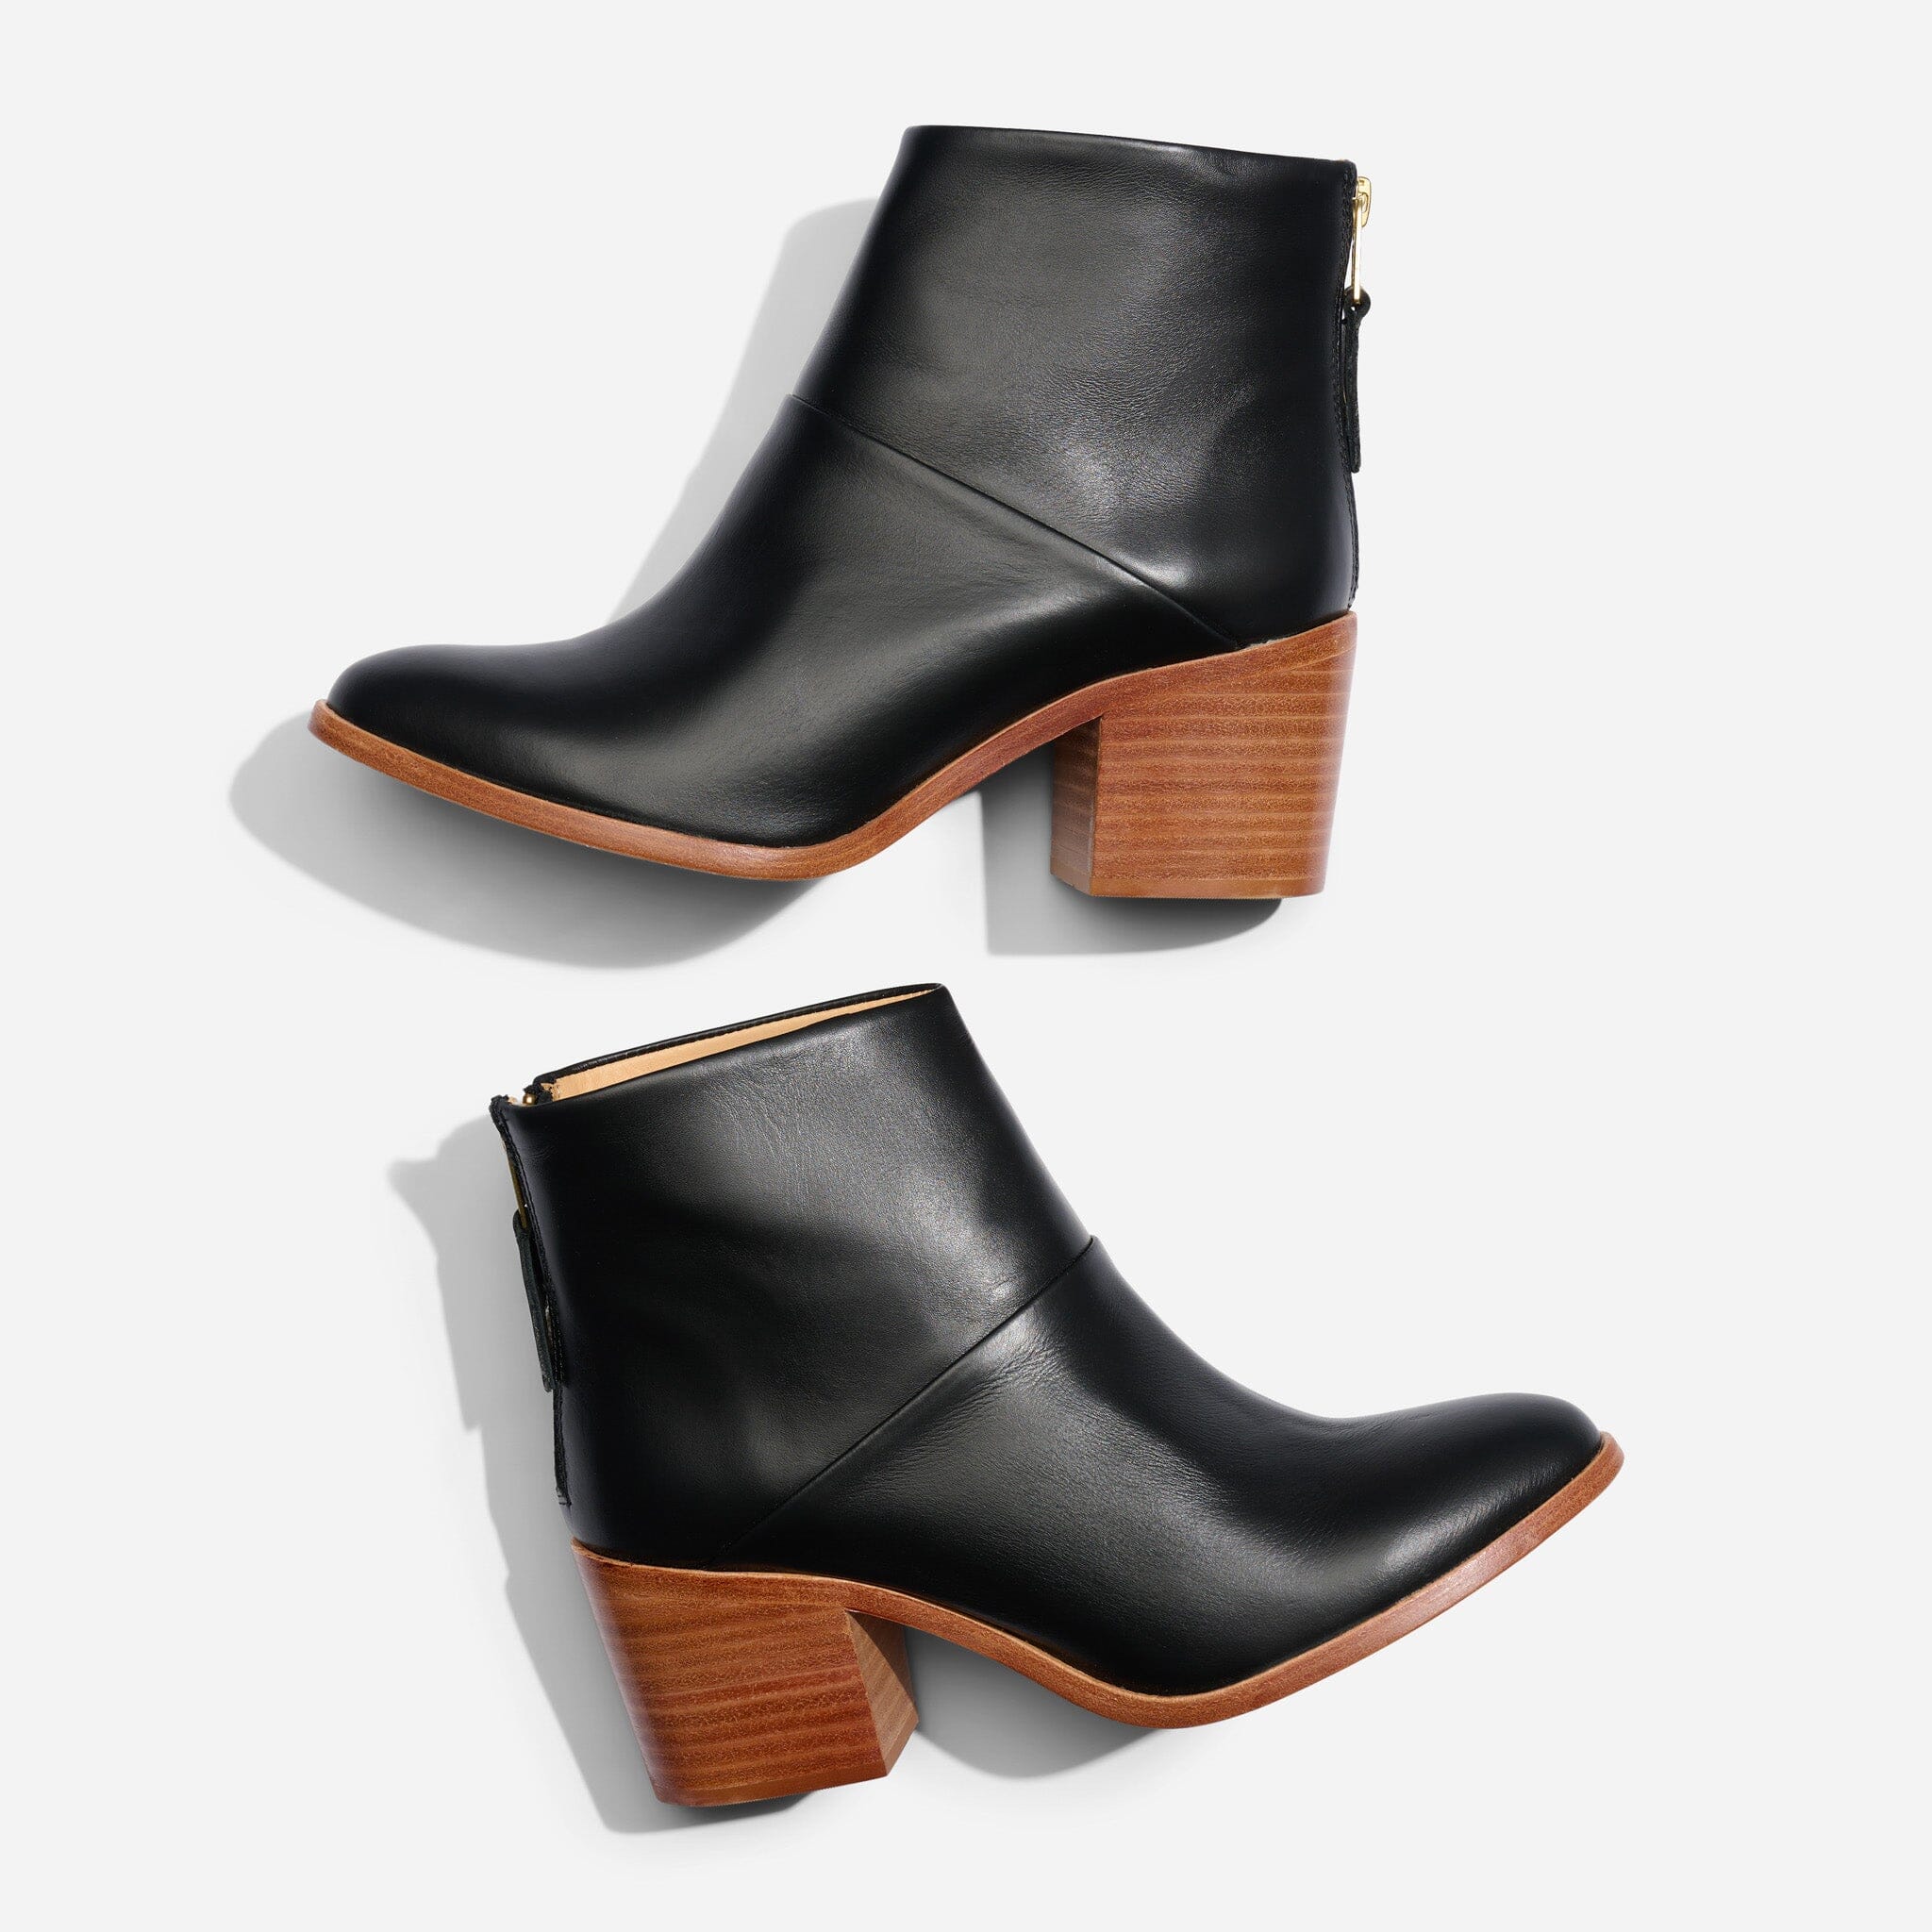 Best Flat Black Leather Ankle Boots for Women: Low-Heel Black Booties